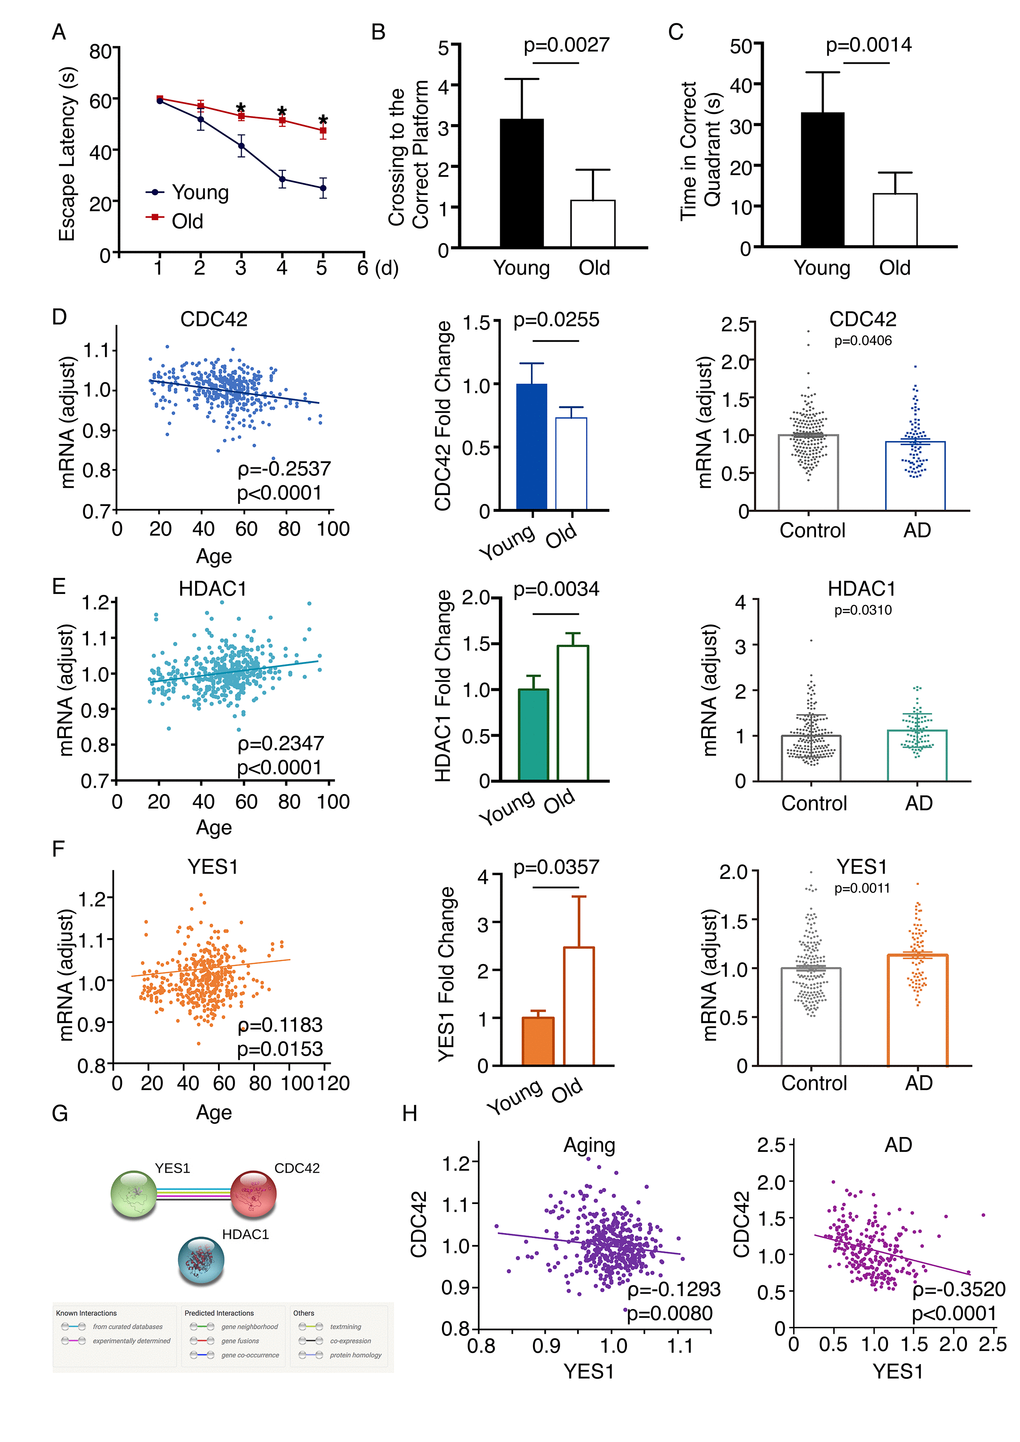 Changes in CDC42, HDAC1 and YES1 mRNA expression in the frontal cortex of an aging mouse model. (A) Escape latency on each day revealed a significant difference between younger and older mice on day 3 (p = 0.0313), day 4 (p = 0.0003), and day 5 (p = 0.0015) (n = 6). The average search errors of the younger and older mice did not differ in the first training trial (p = 0.3409) (n = 6). (B) (C) The numbers of times mice crossed to the correct platform (p = 0.0027) and the times in the correct quadrant (p = 0.0014) differed on the fifth day (n = 6). (D) Expression of CDC42 mRNA was associated with age through screening the GSE71620 dataset (ρ = -0.2537; P E) HDAC1 mRNA expression was associated with age through screening the GSE71620 dataset (ρ = 0.2347, p F) Expression of YES1 mRNA was associated with age through screening the GSE71620 dataset (ρ = 0.1183; p = 0.0153). Levels of Yes1 mRNA were higher in older than younger mice (n = 6, p = 0.0357). Analyzing the GSE48350 dataset revealed levels of YES1 mRNA were higher in the frontal cortices of people with AD than in those of healthy subjects (p = 0.0011). (G) Functional link between YES1 and CDC42 determined using the STRING database to detect protein interactions. (H) YES1 mRNA levels associate with CDC42 in both neural aging and AD, as indicated by screening the GSE71620 (ρ = -0.1293; p = 0.0080) and GSE48350 (ρ = -0.3520; p 